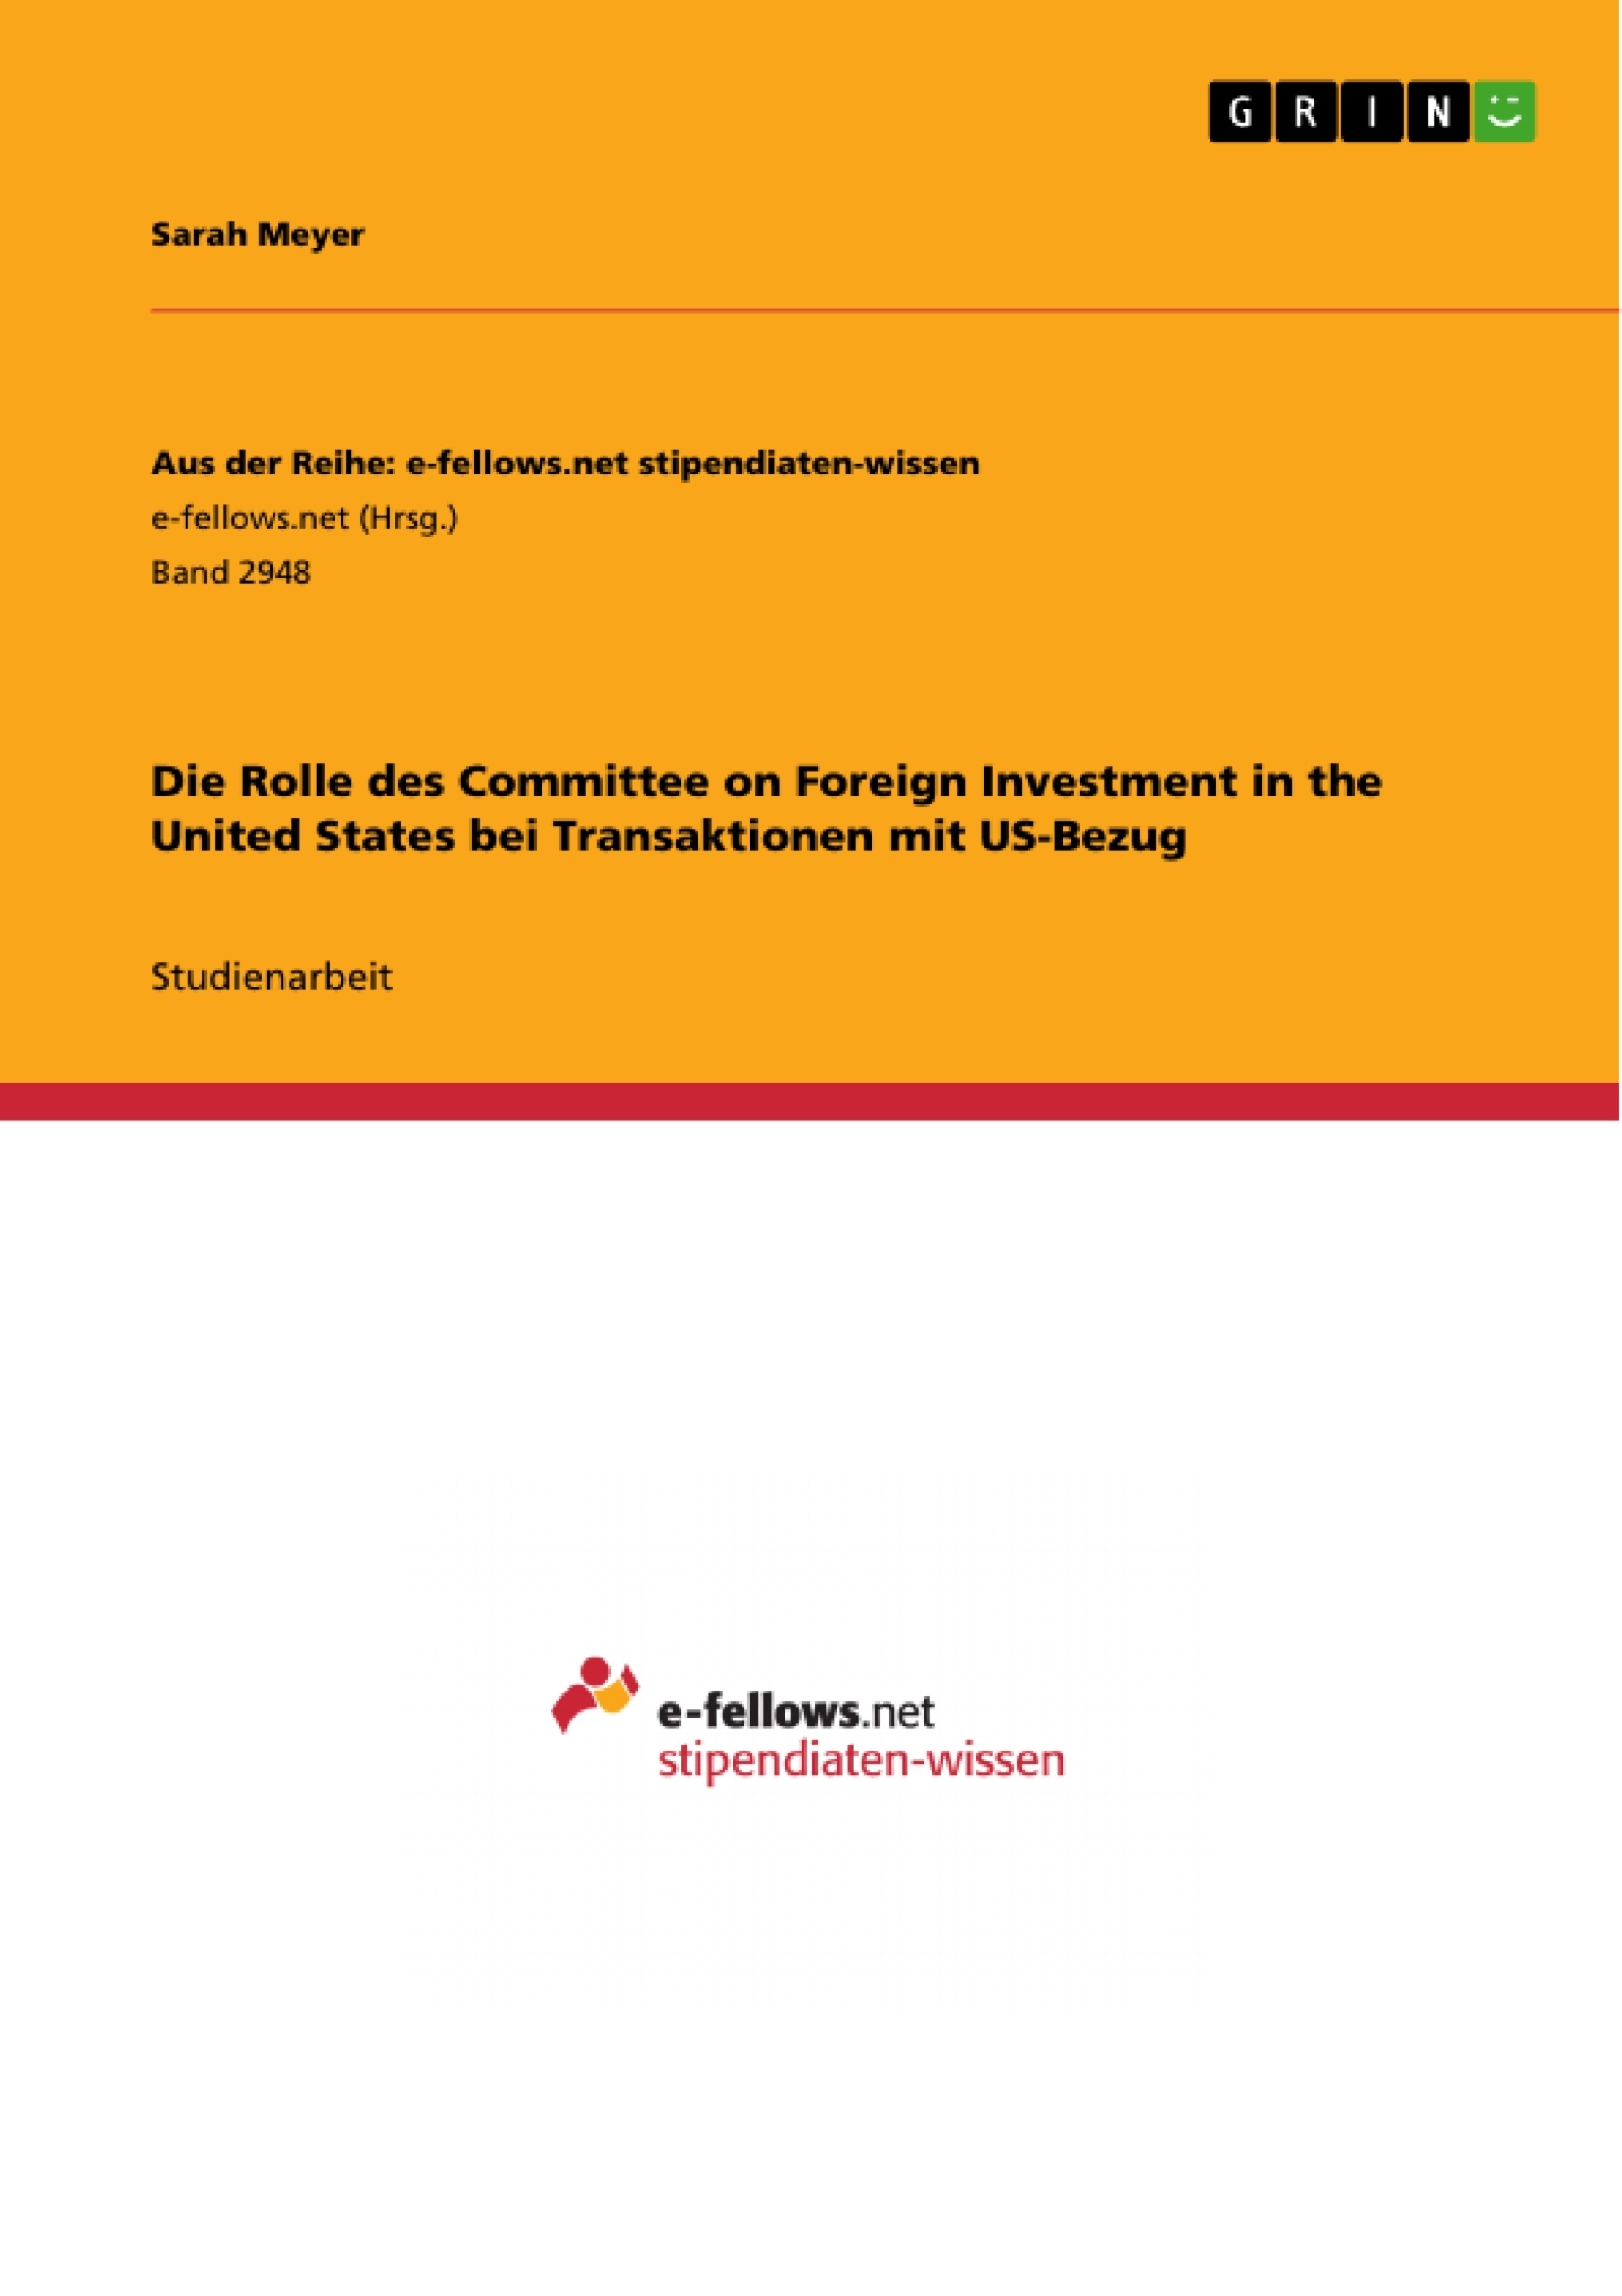 Título: Die Rolle des Committee on Foreign Investment in the United States bei Transaktionen mit US-Bezug